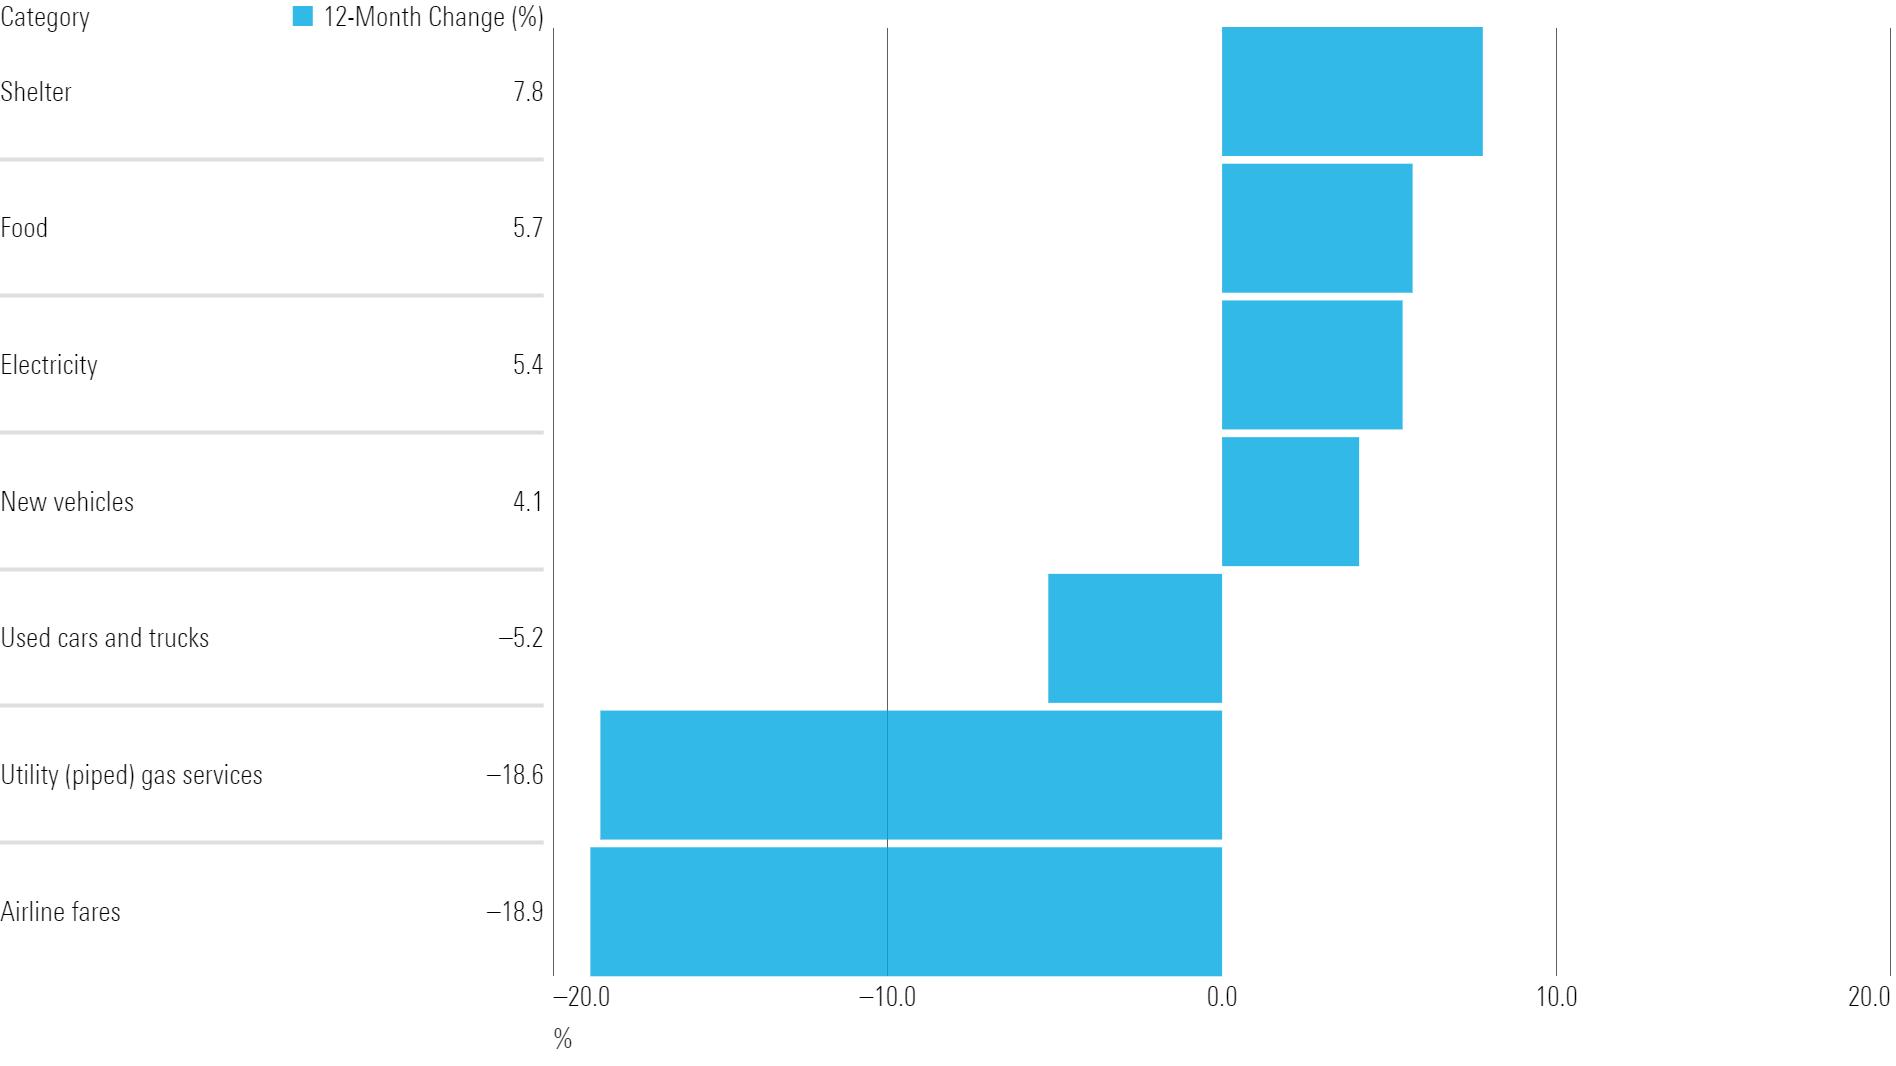 Bar chart showing 12-month changes in key CPI components including shelter, food, and electricity.